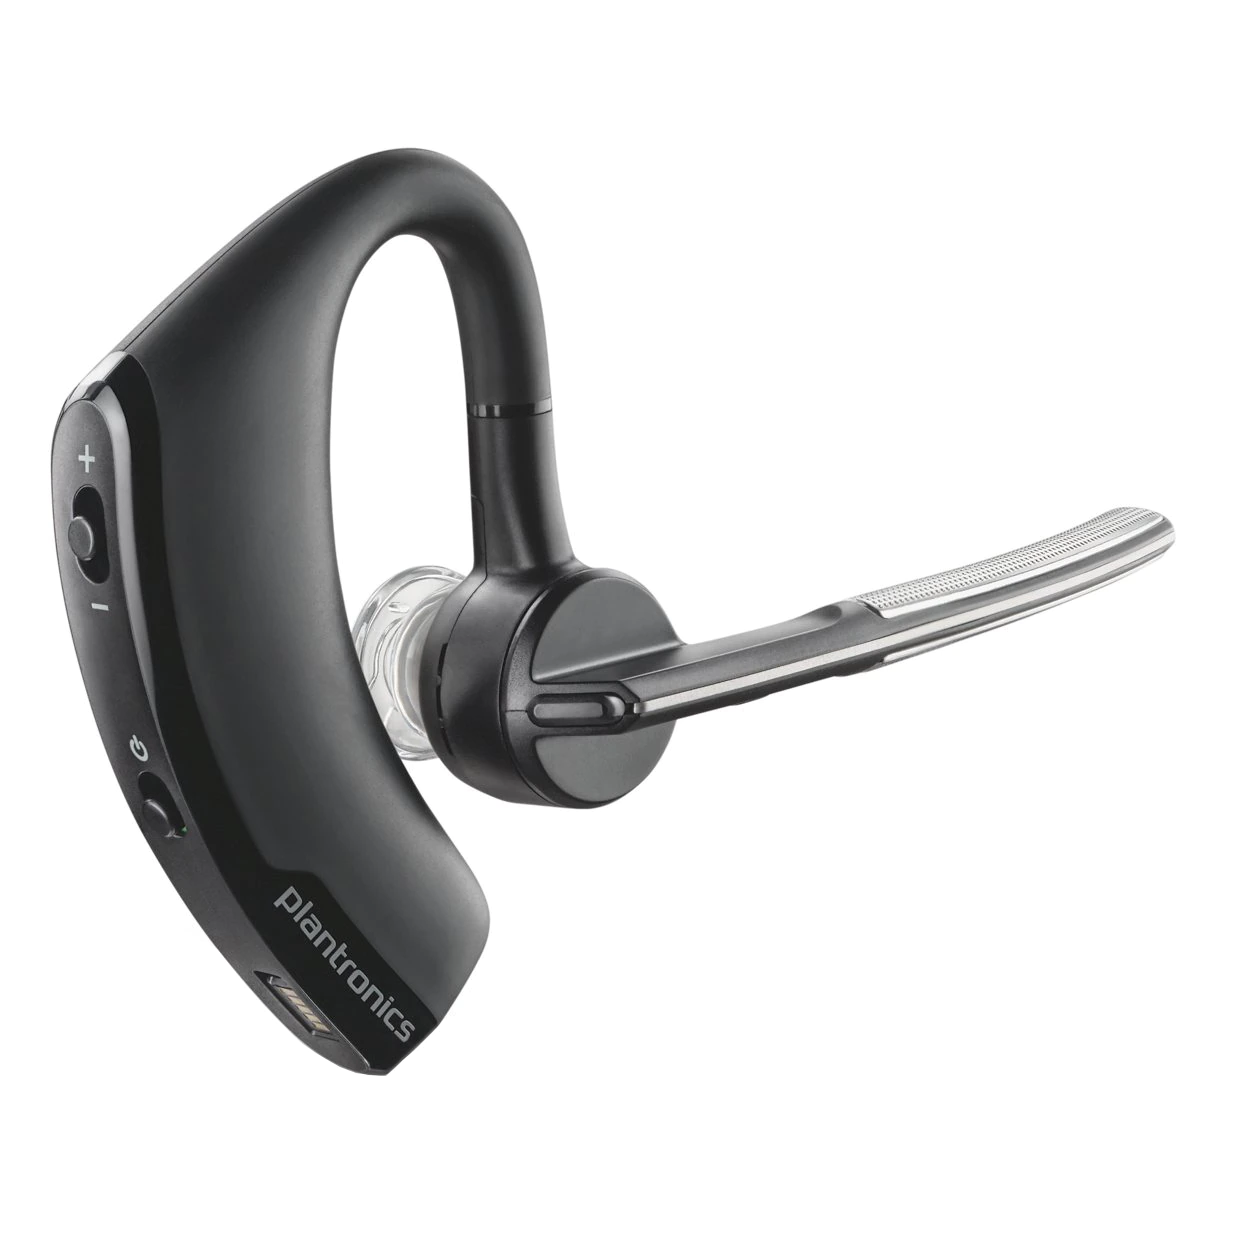 Casca Bluetooth Plantronics Voyager Legend, Compatibil Android si iOS, Microfon, Negru Android